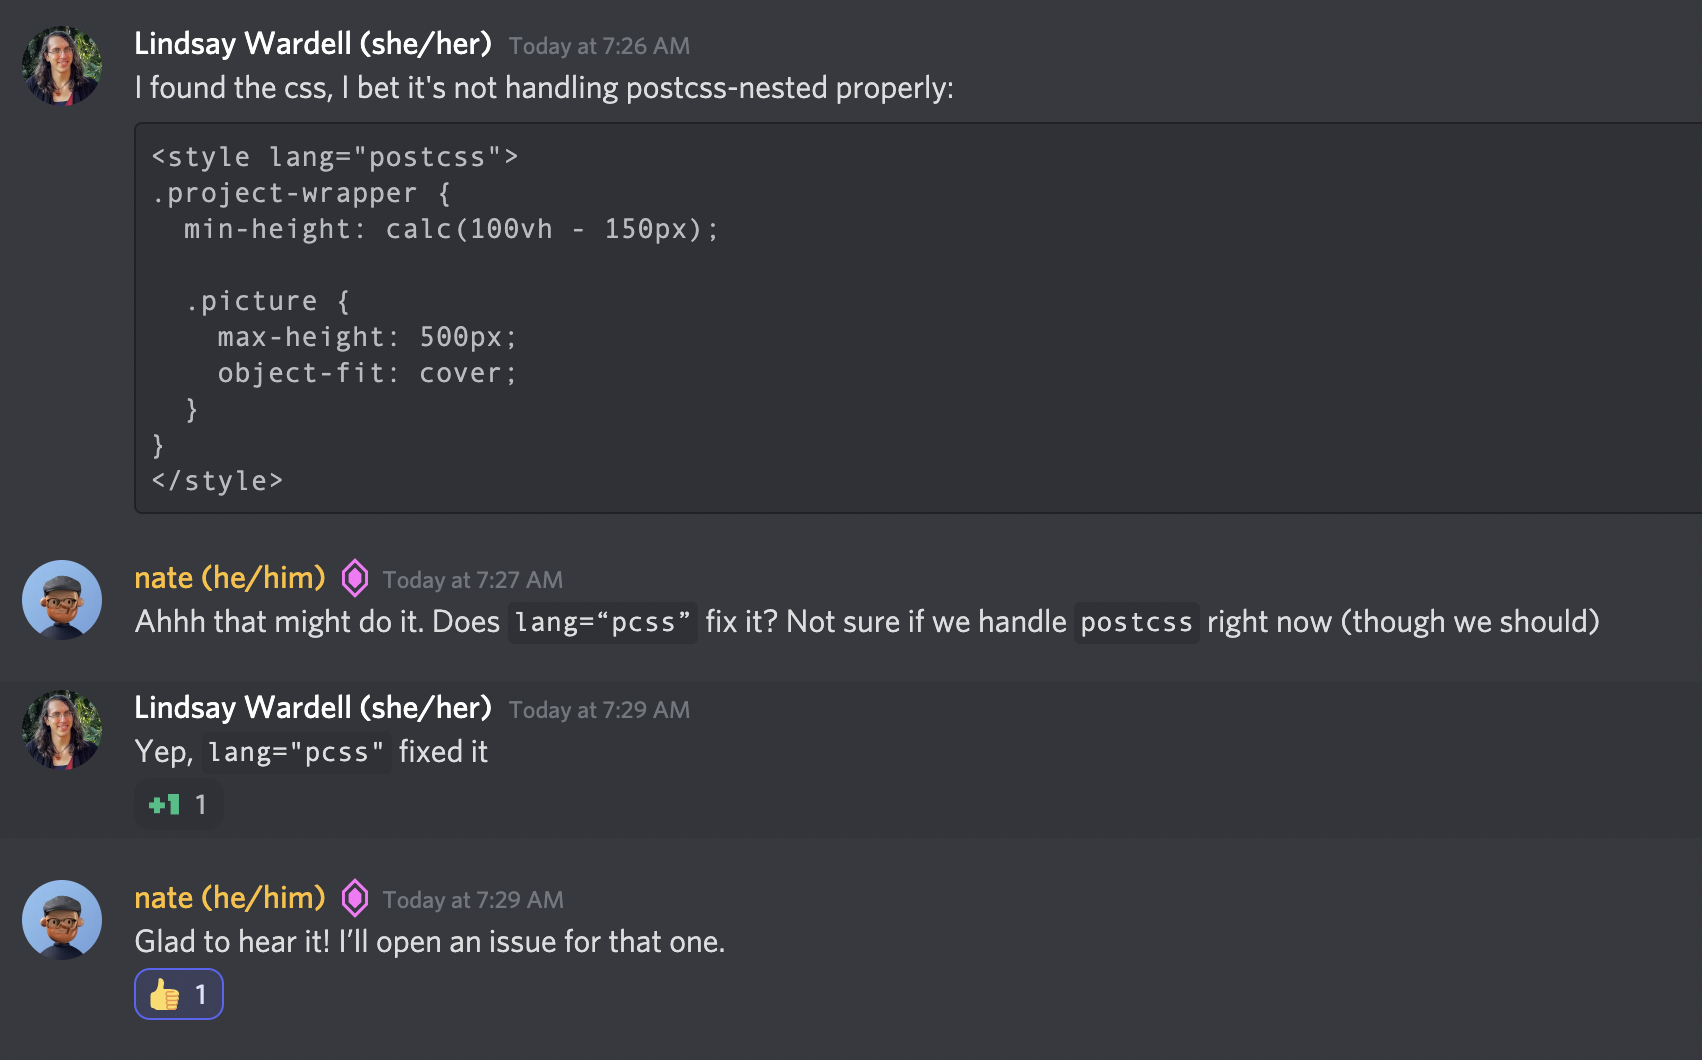 Discord chat discussion between Lindasy and Nate regarding PostCSS